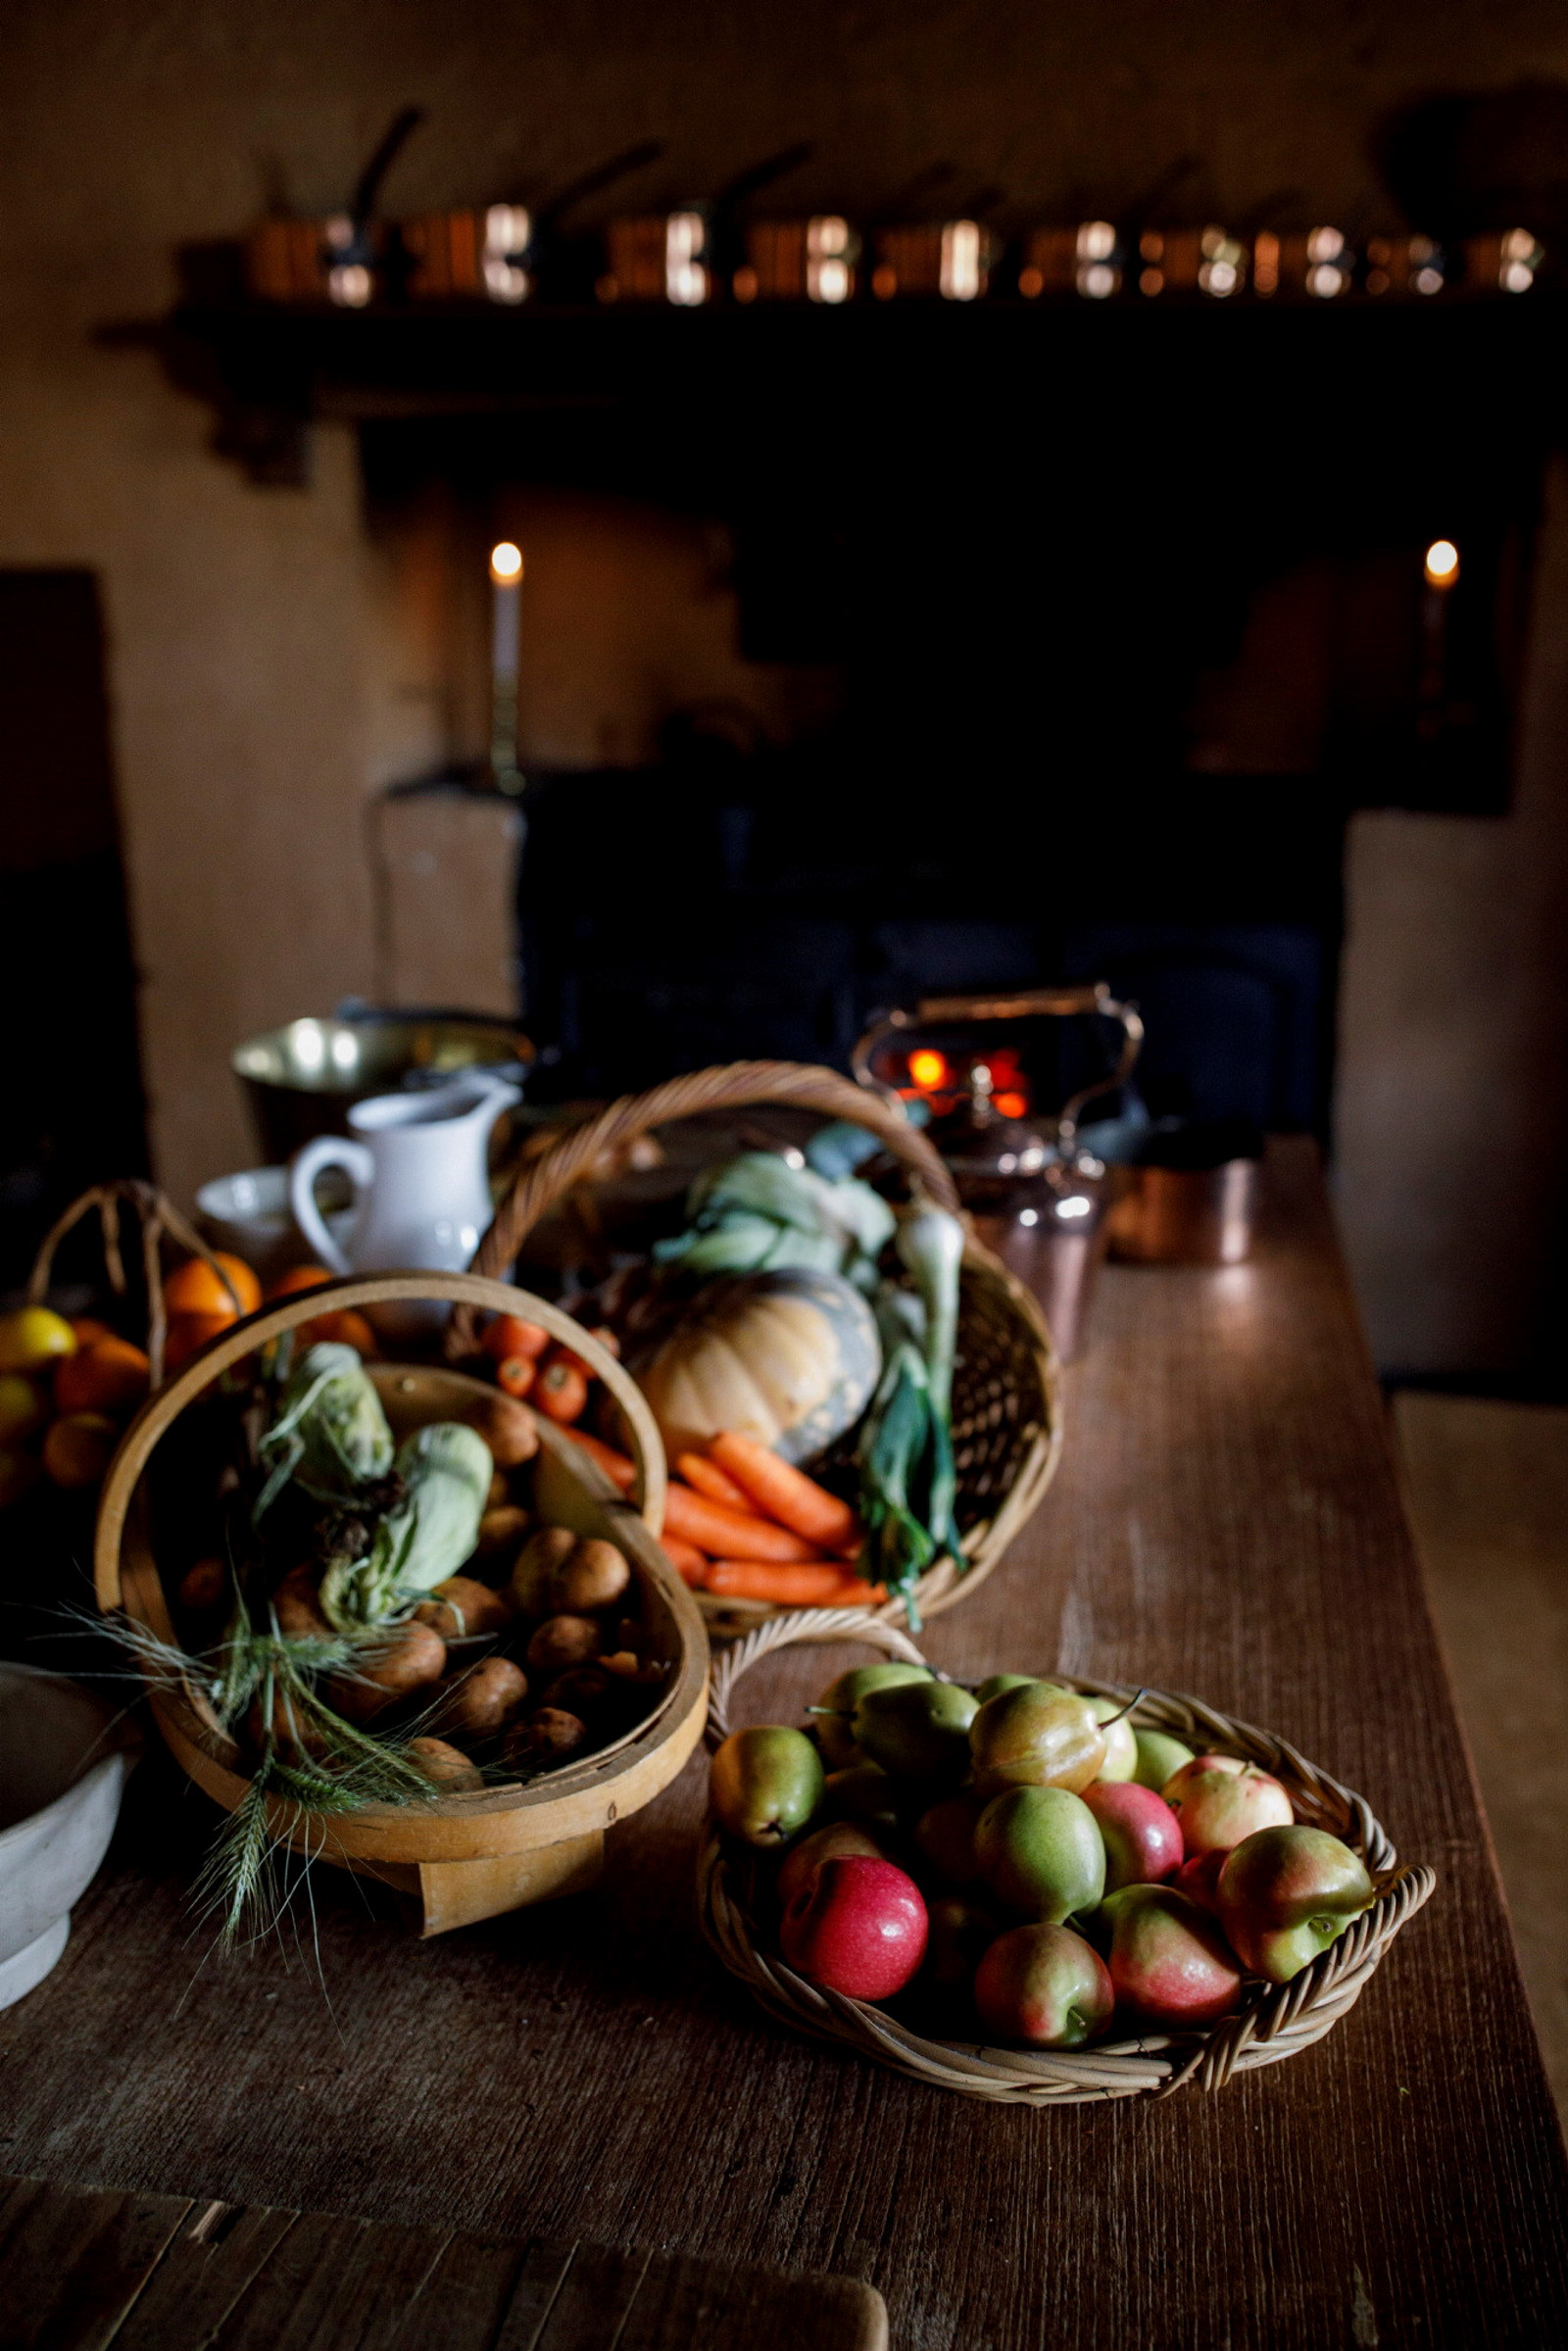 Fruit and vegetables arranged on wooden table.